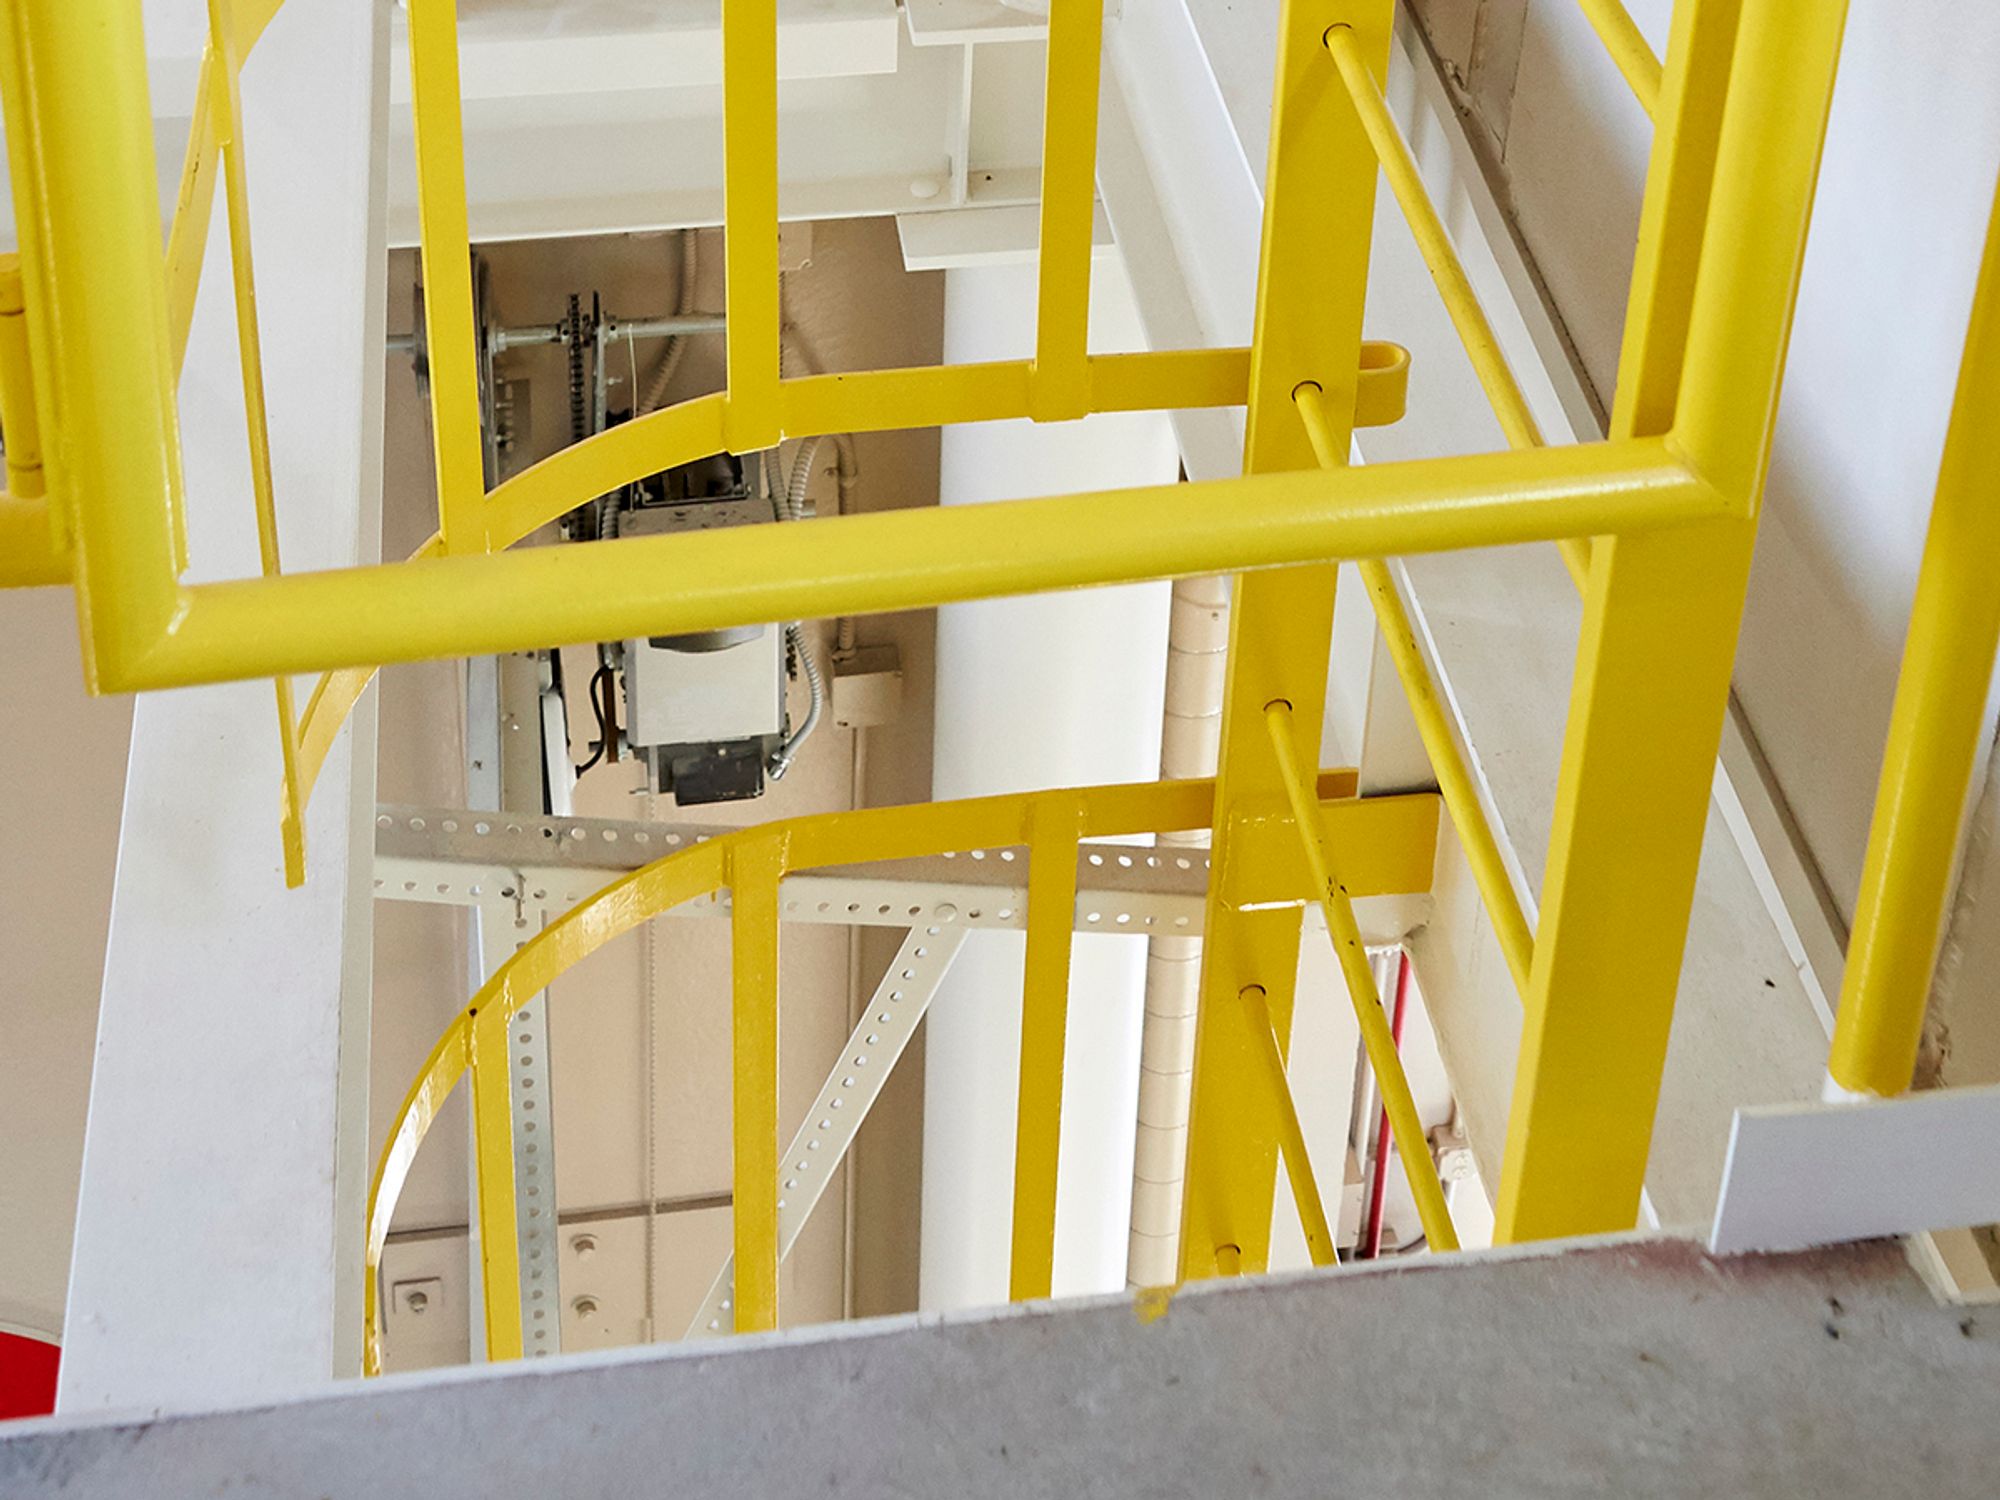 Install self-closing gates or offsets at the tops of fixed ladders